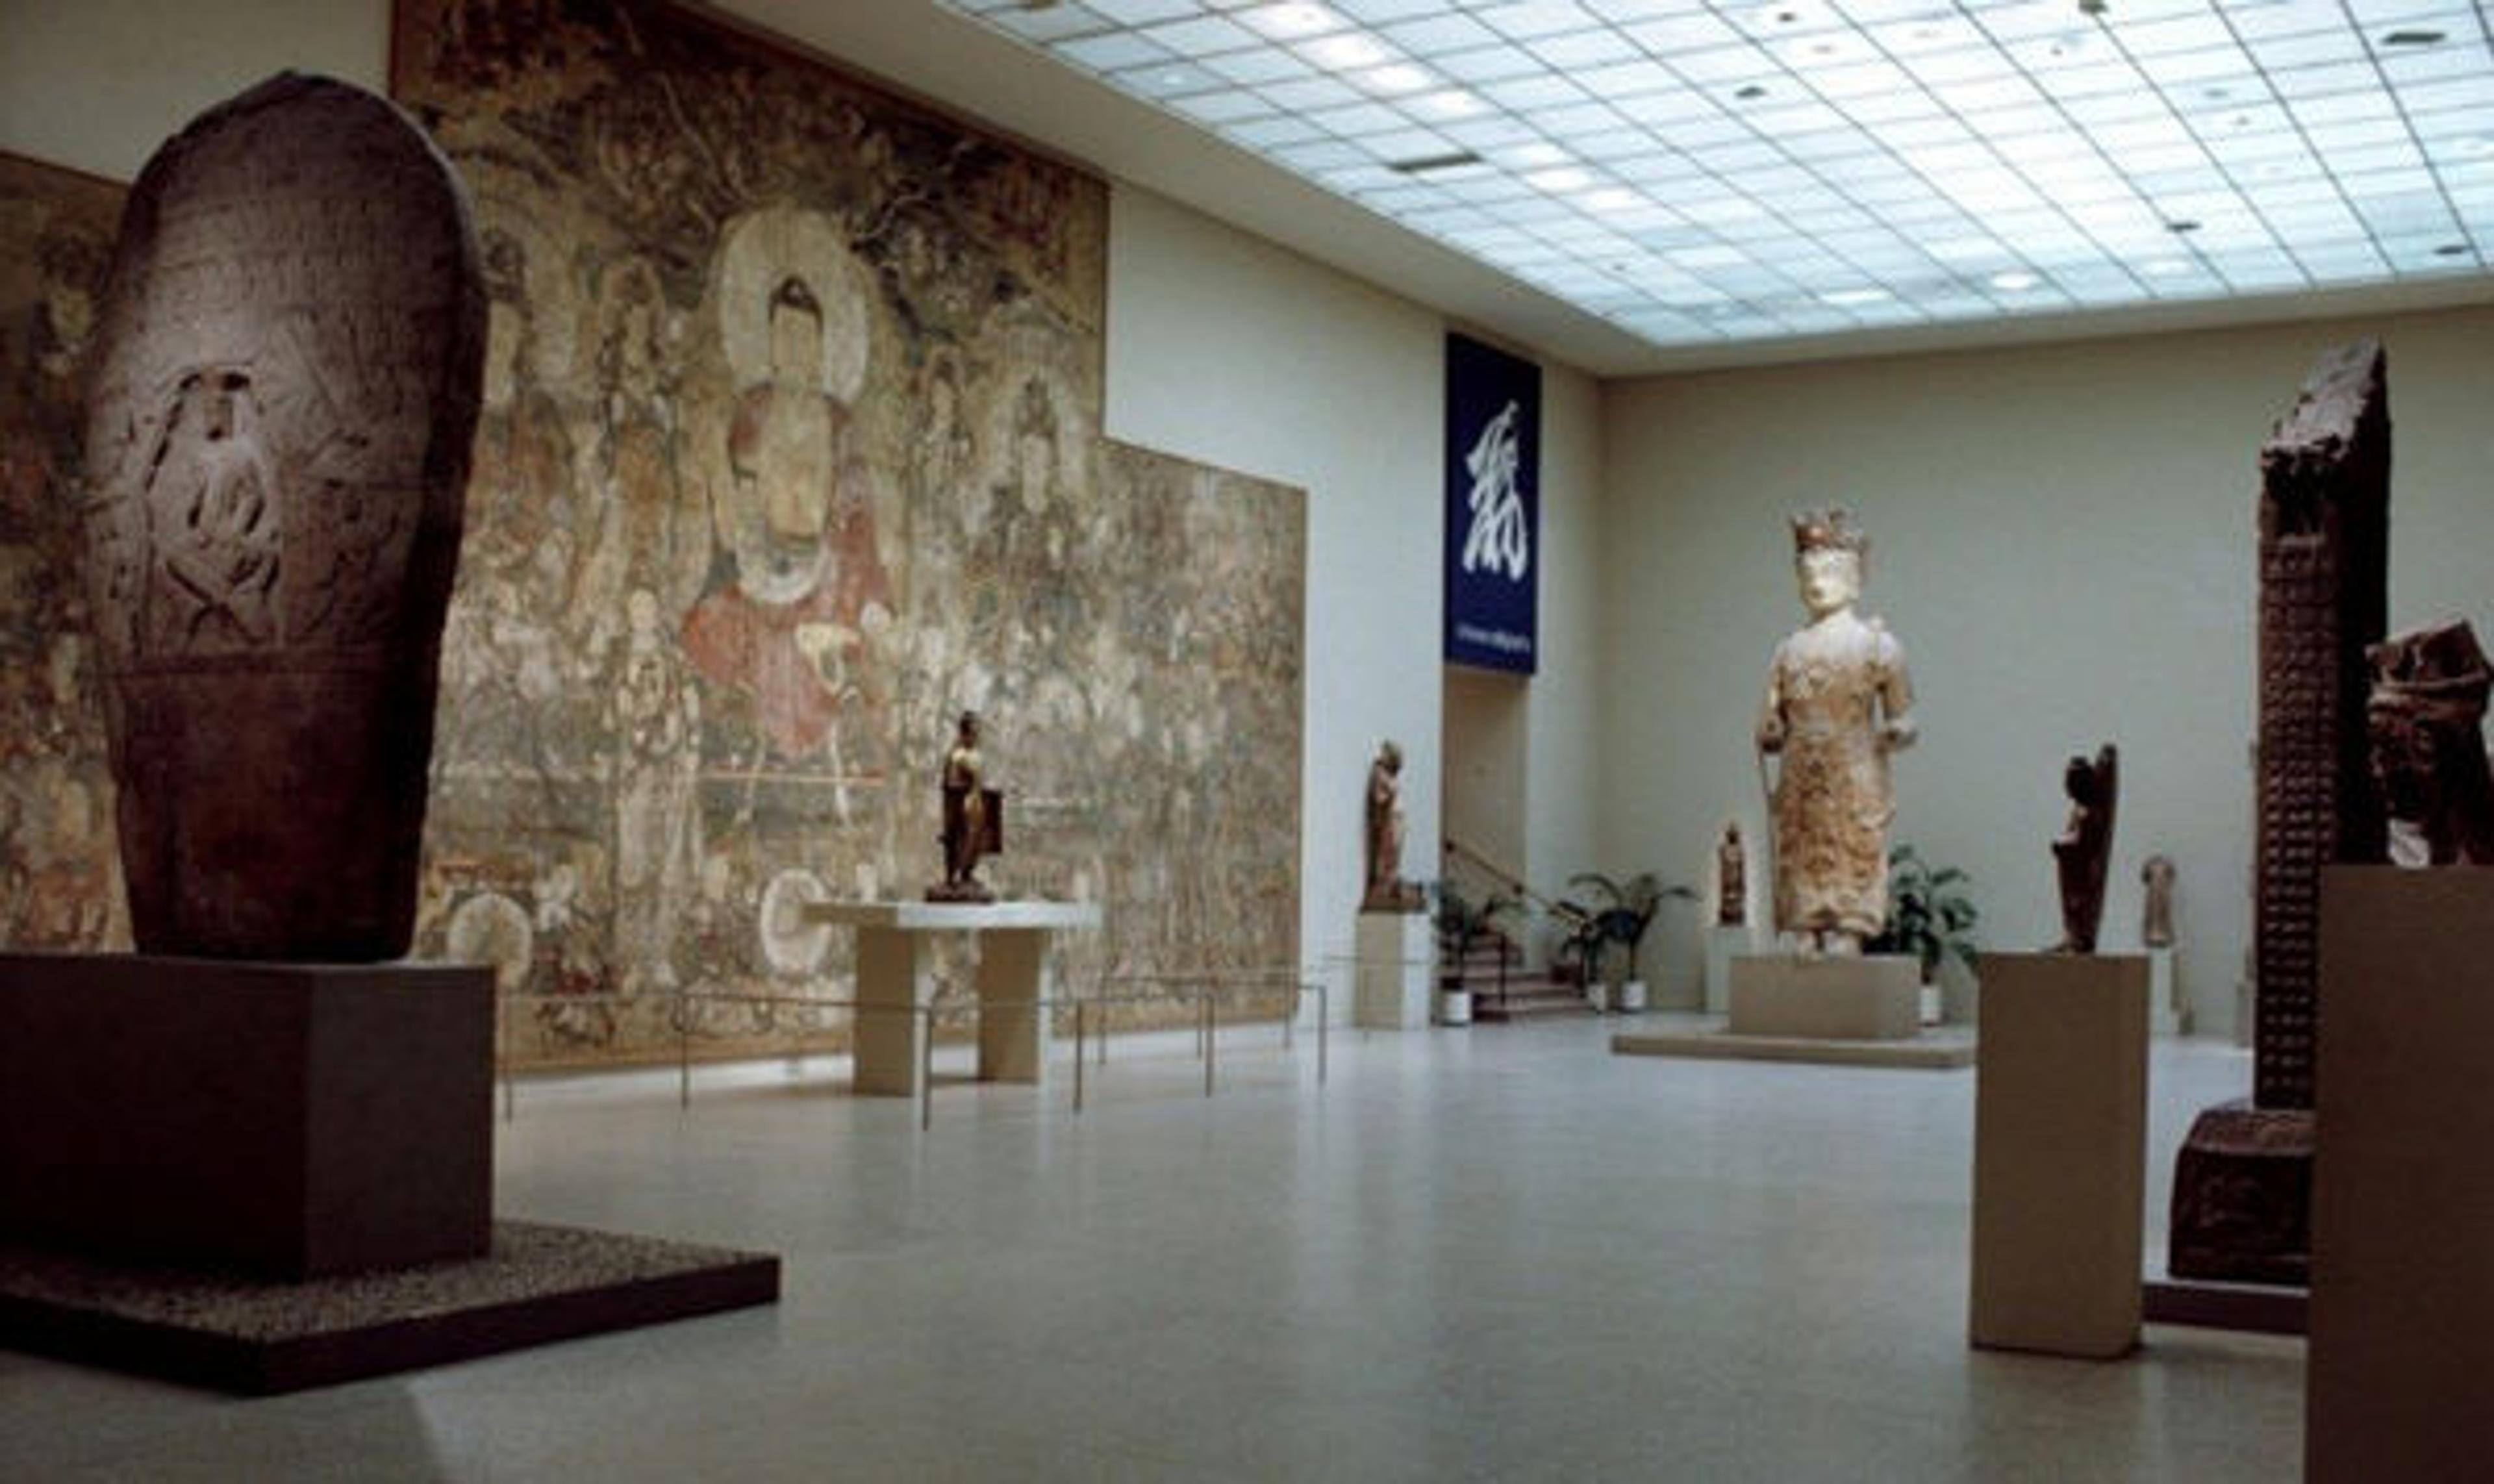 The Arthur M. Sackler Gallery with a sign for the 1972 exhibition Chinese Calligraphy: 3,000 Years of Art of the Brush (now gallery 206). Photographed in 1972